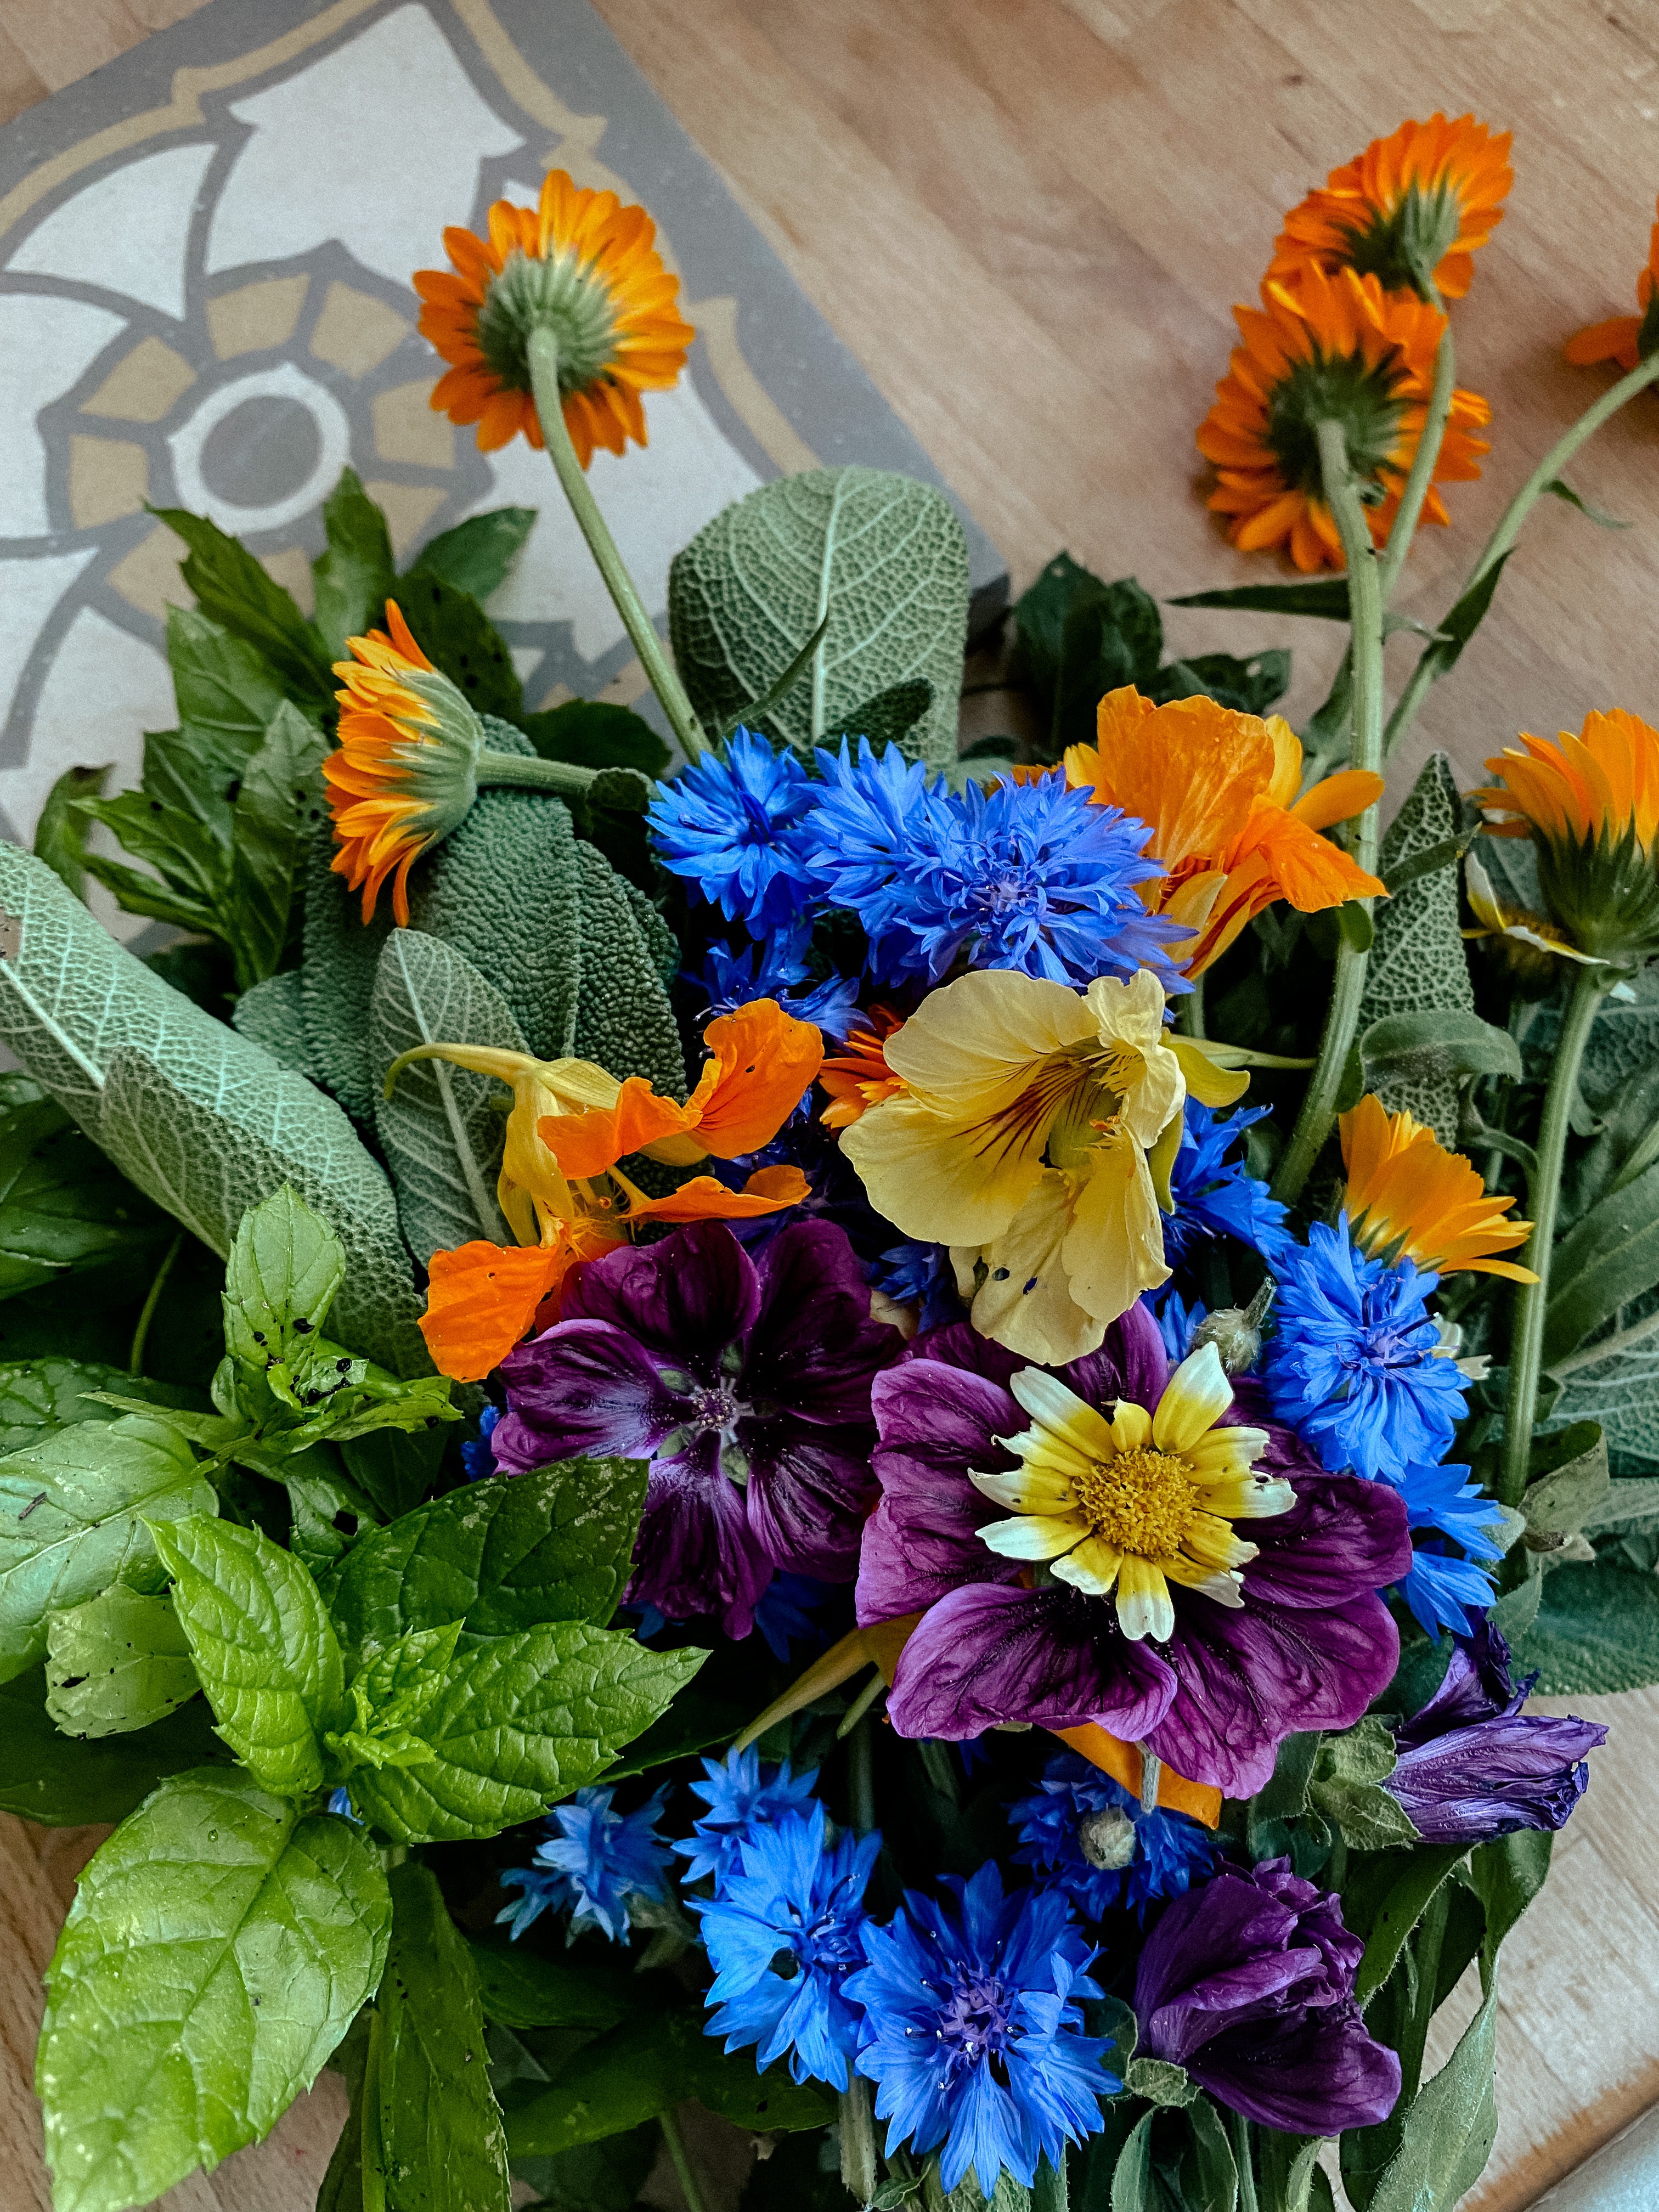 Edible &amp; Wild - Magical wild herbs with edible flowers